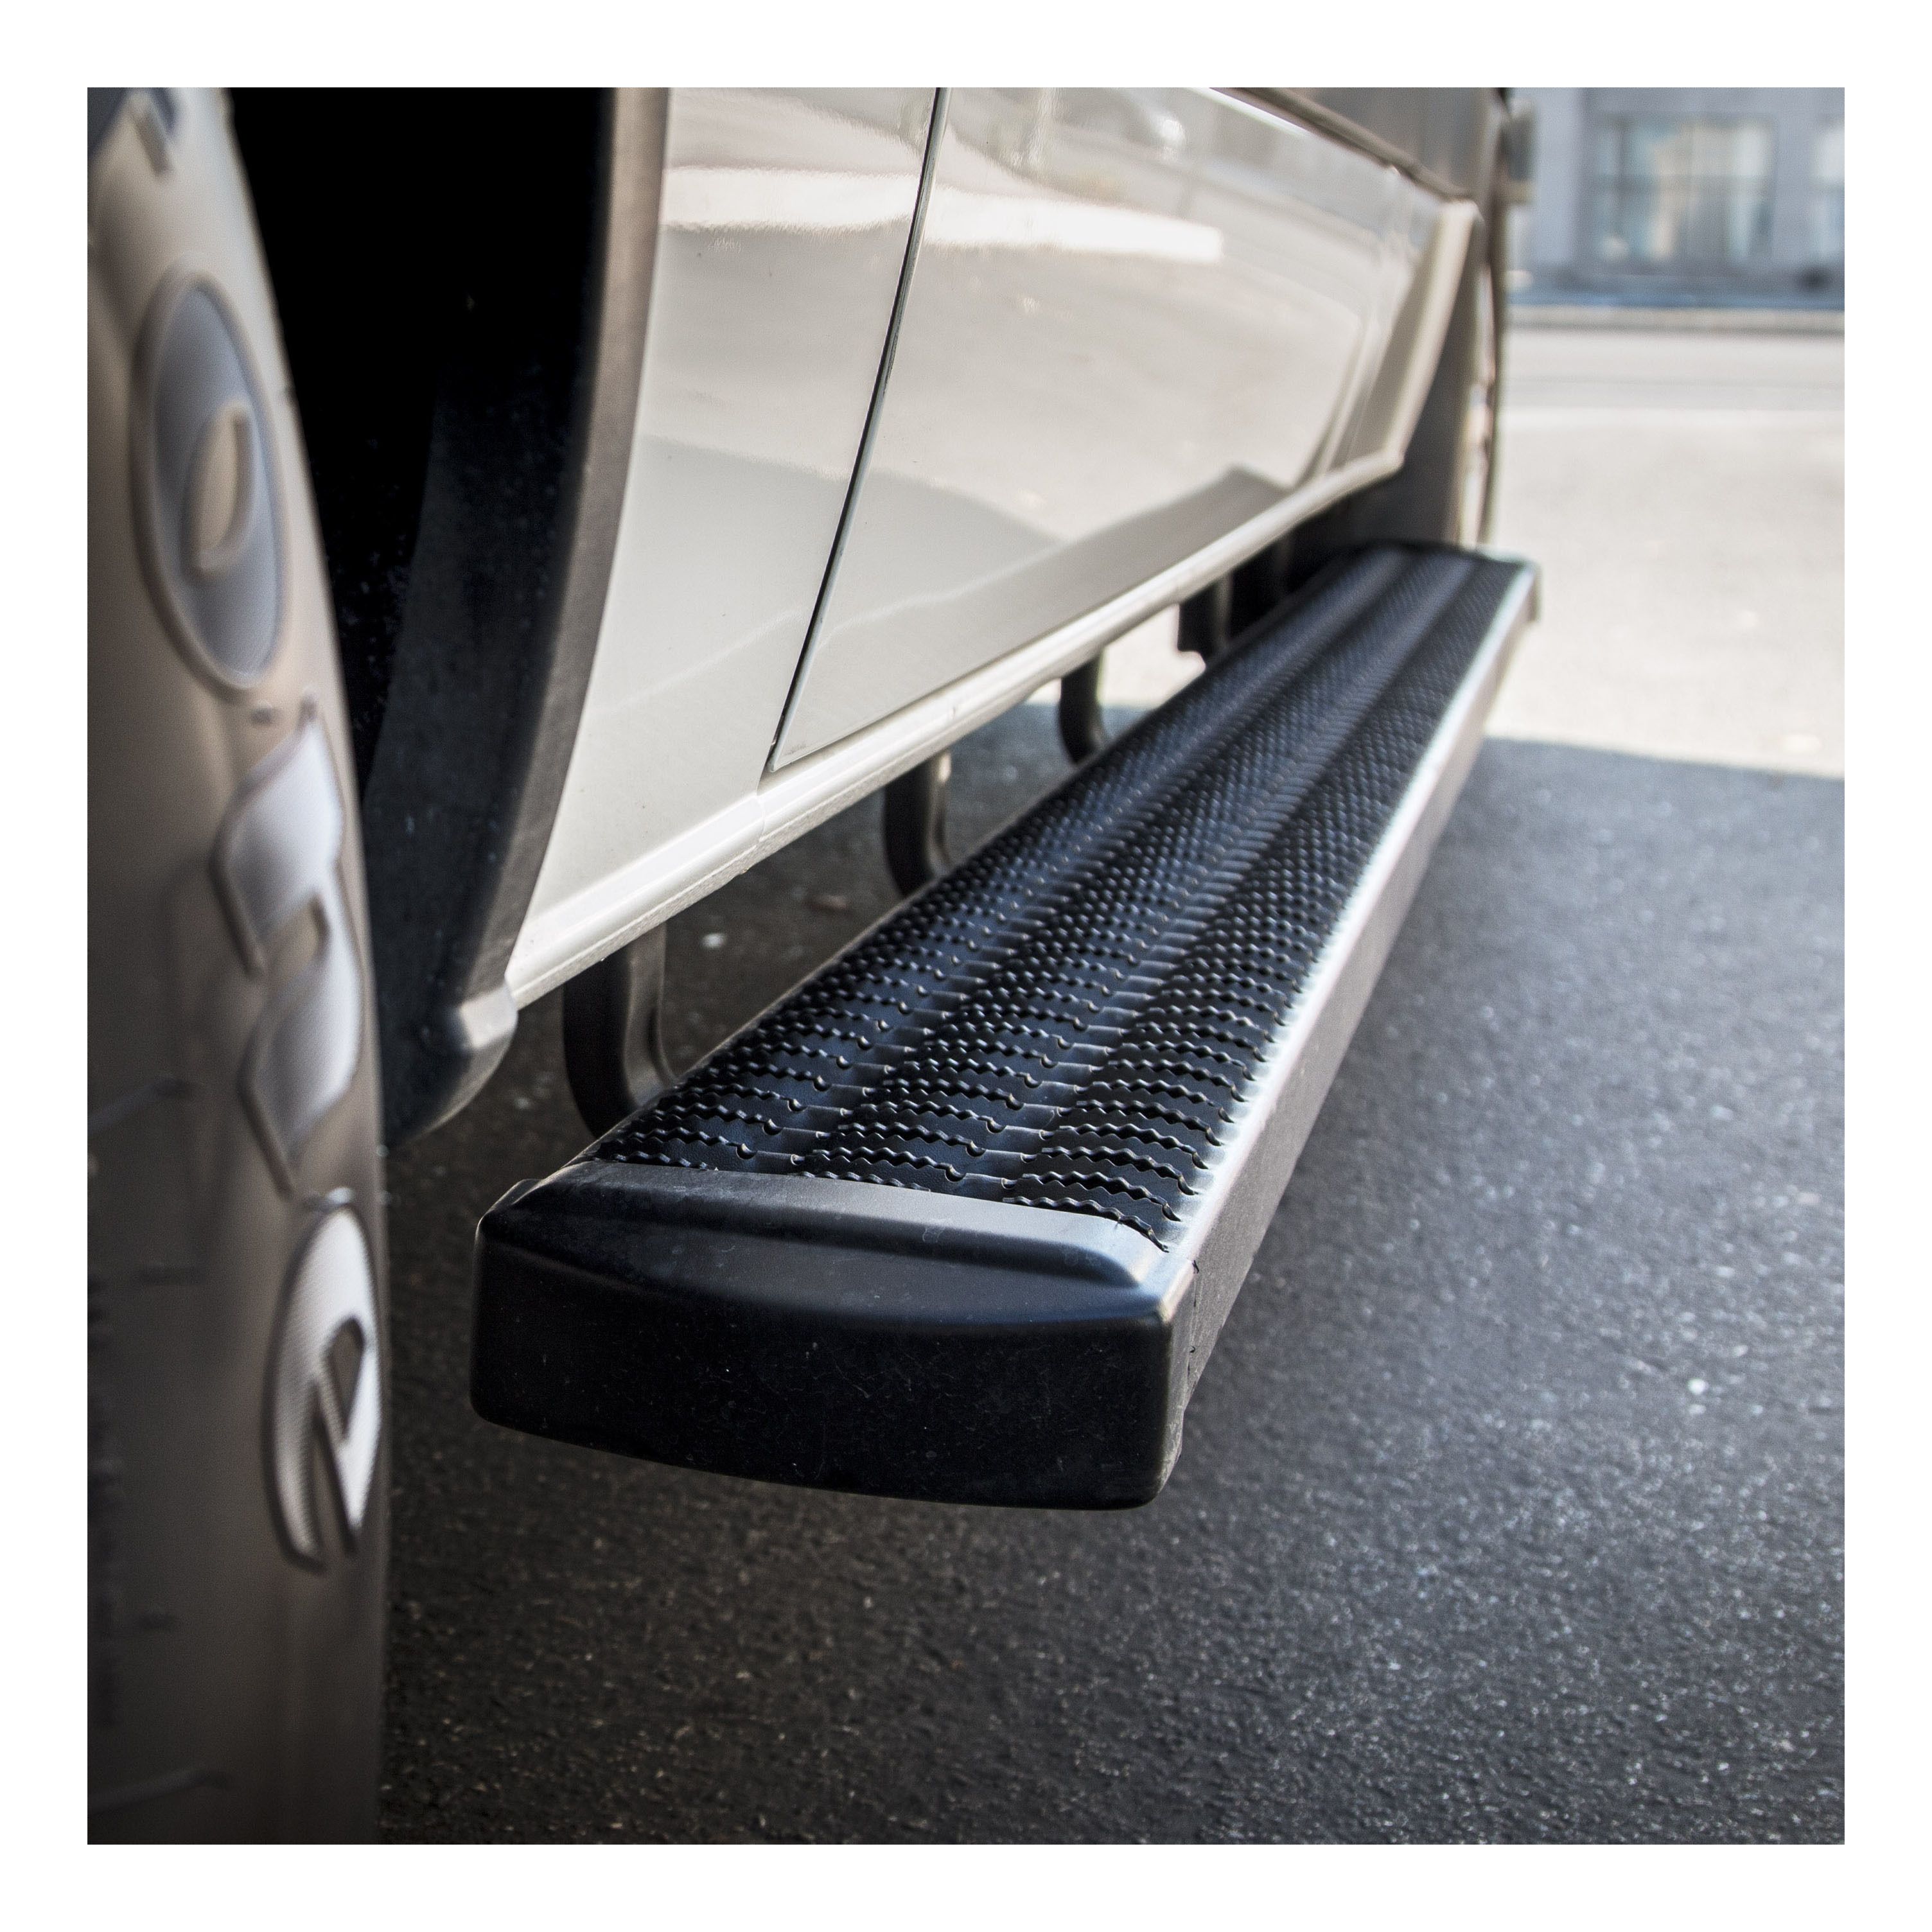 2007-2013 Chevrolet Silverado 1500 Ext Cab Grip Step 7" Running Boards Black Textured Luverne Running Boards For 2012 Chevy Silverado Extended Cab